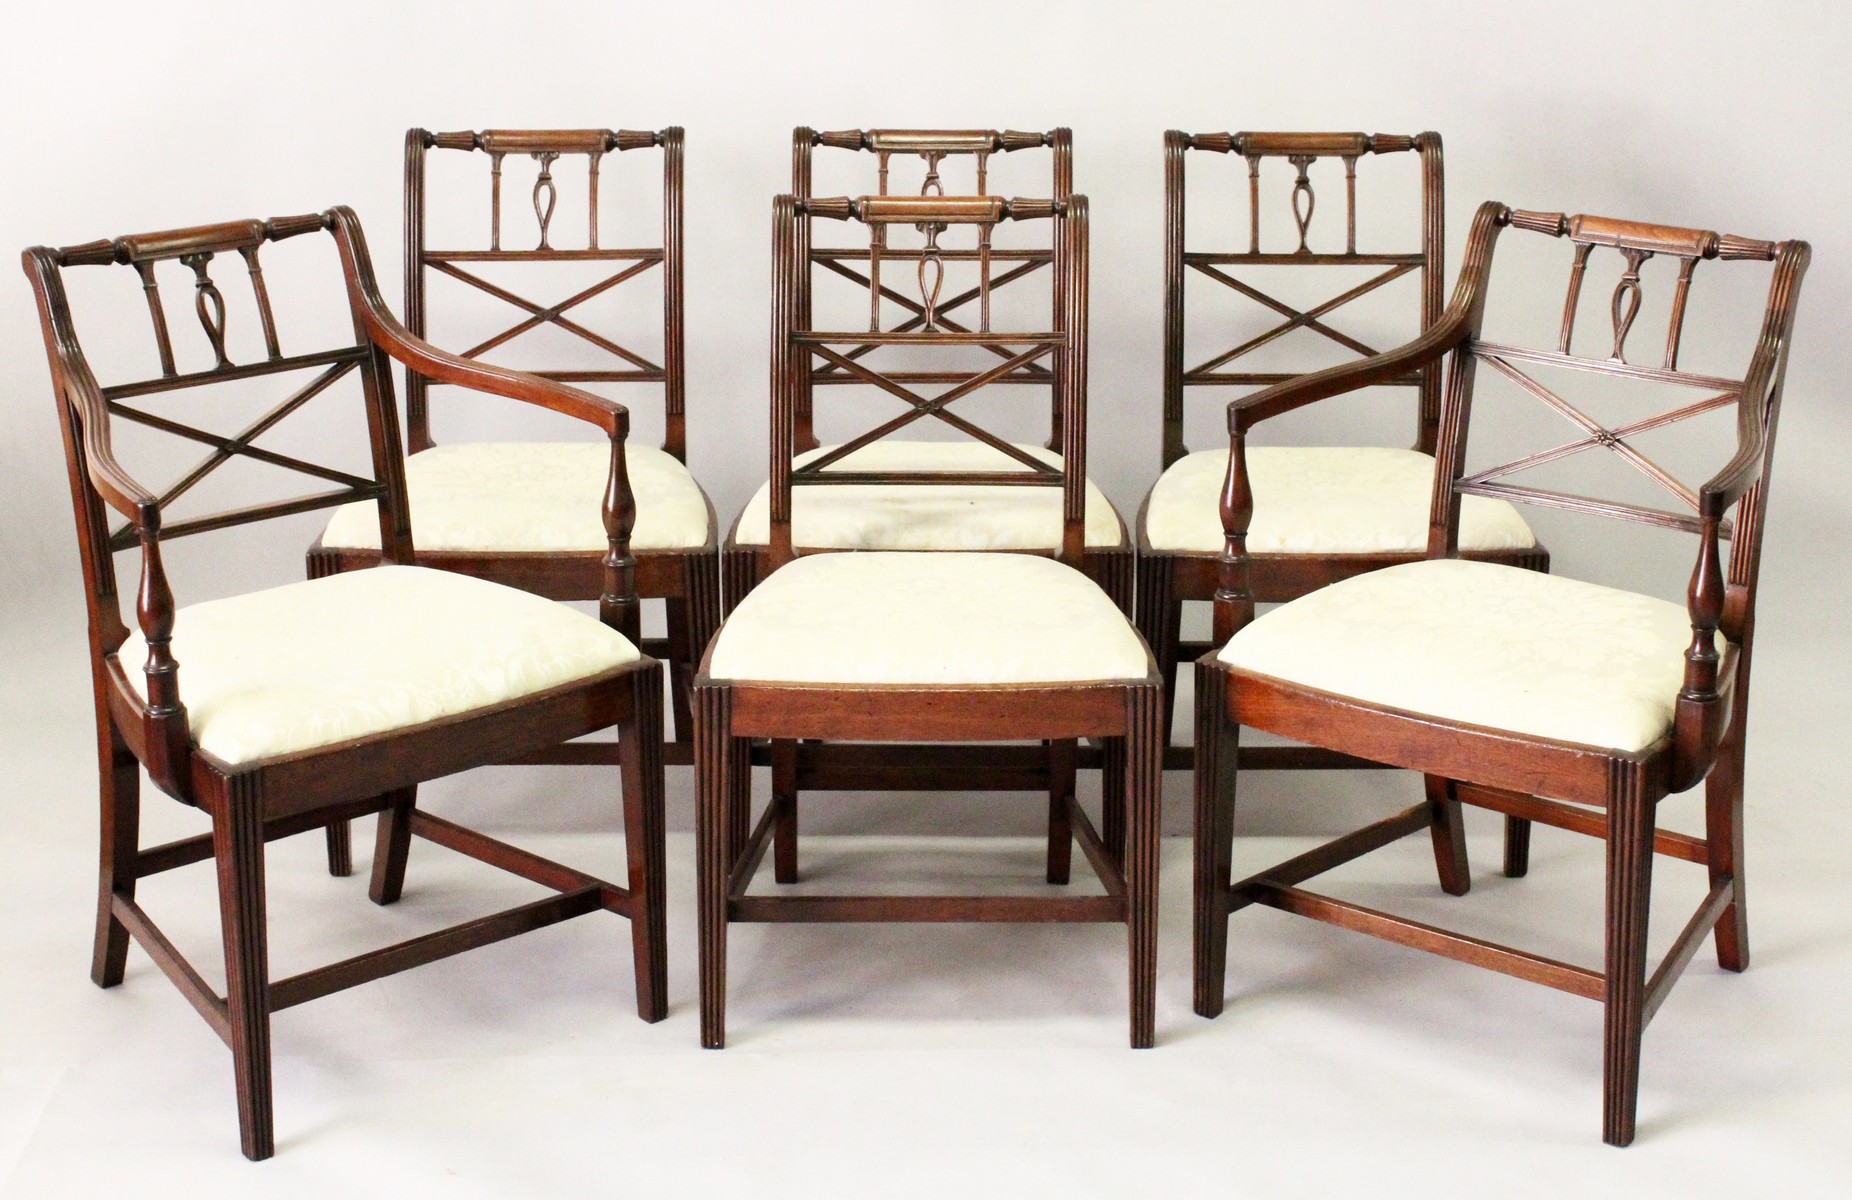 A SET OF SIX EARLY 20TH CENTURY MAHOGANY DINING CHAIRS, two with arms, all with turned and carved